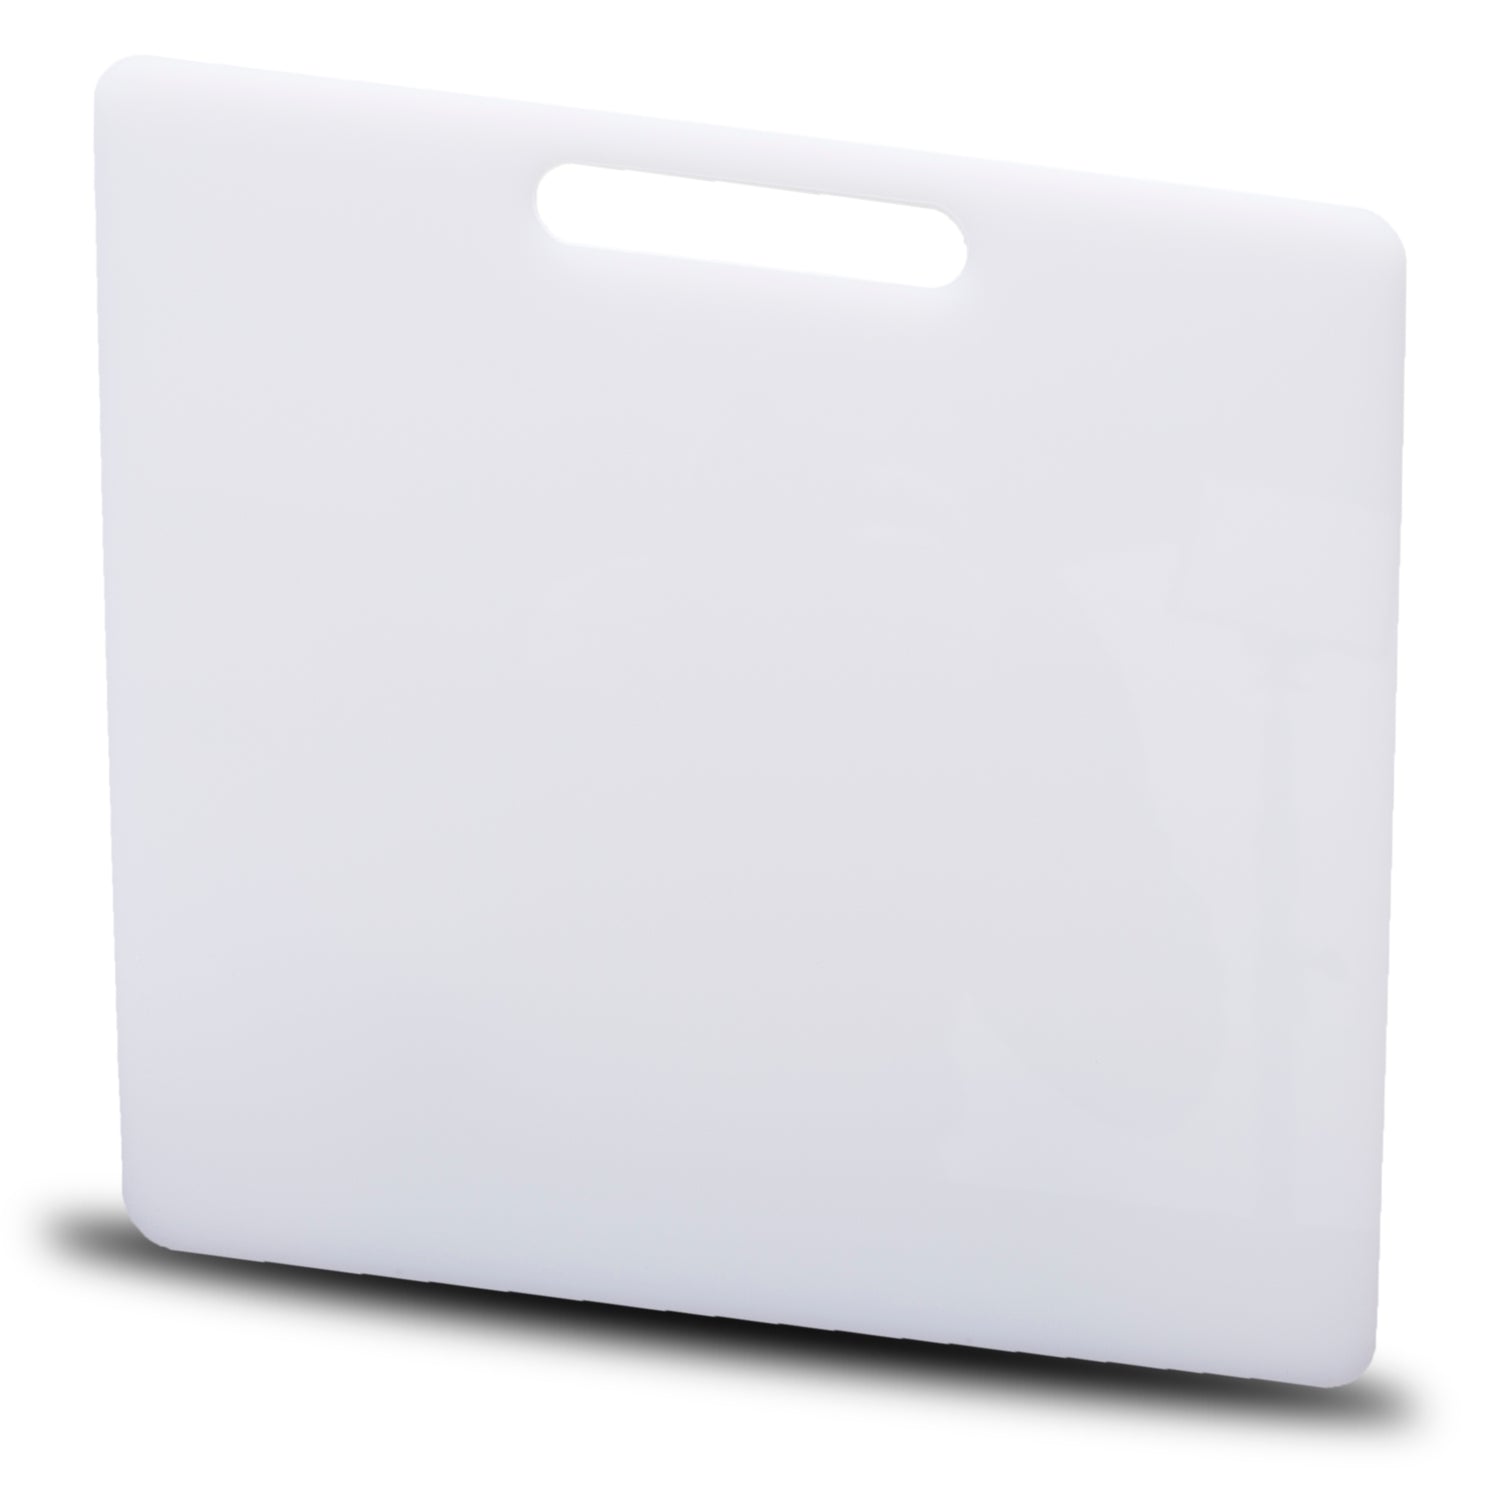 Accessory - Interior Divider / Cutting Board for 55 Quart Cobalt Coolers